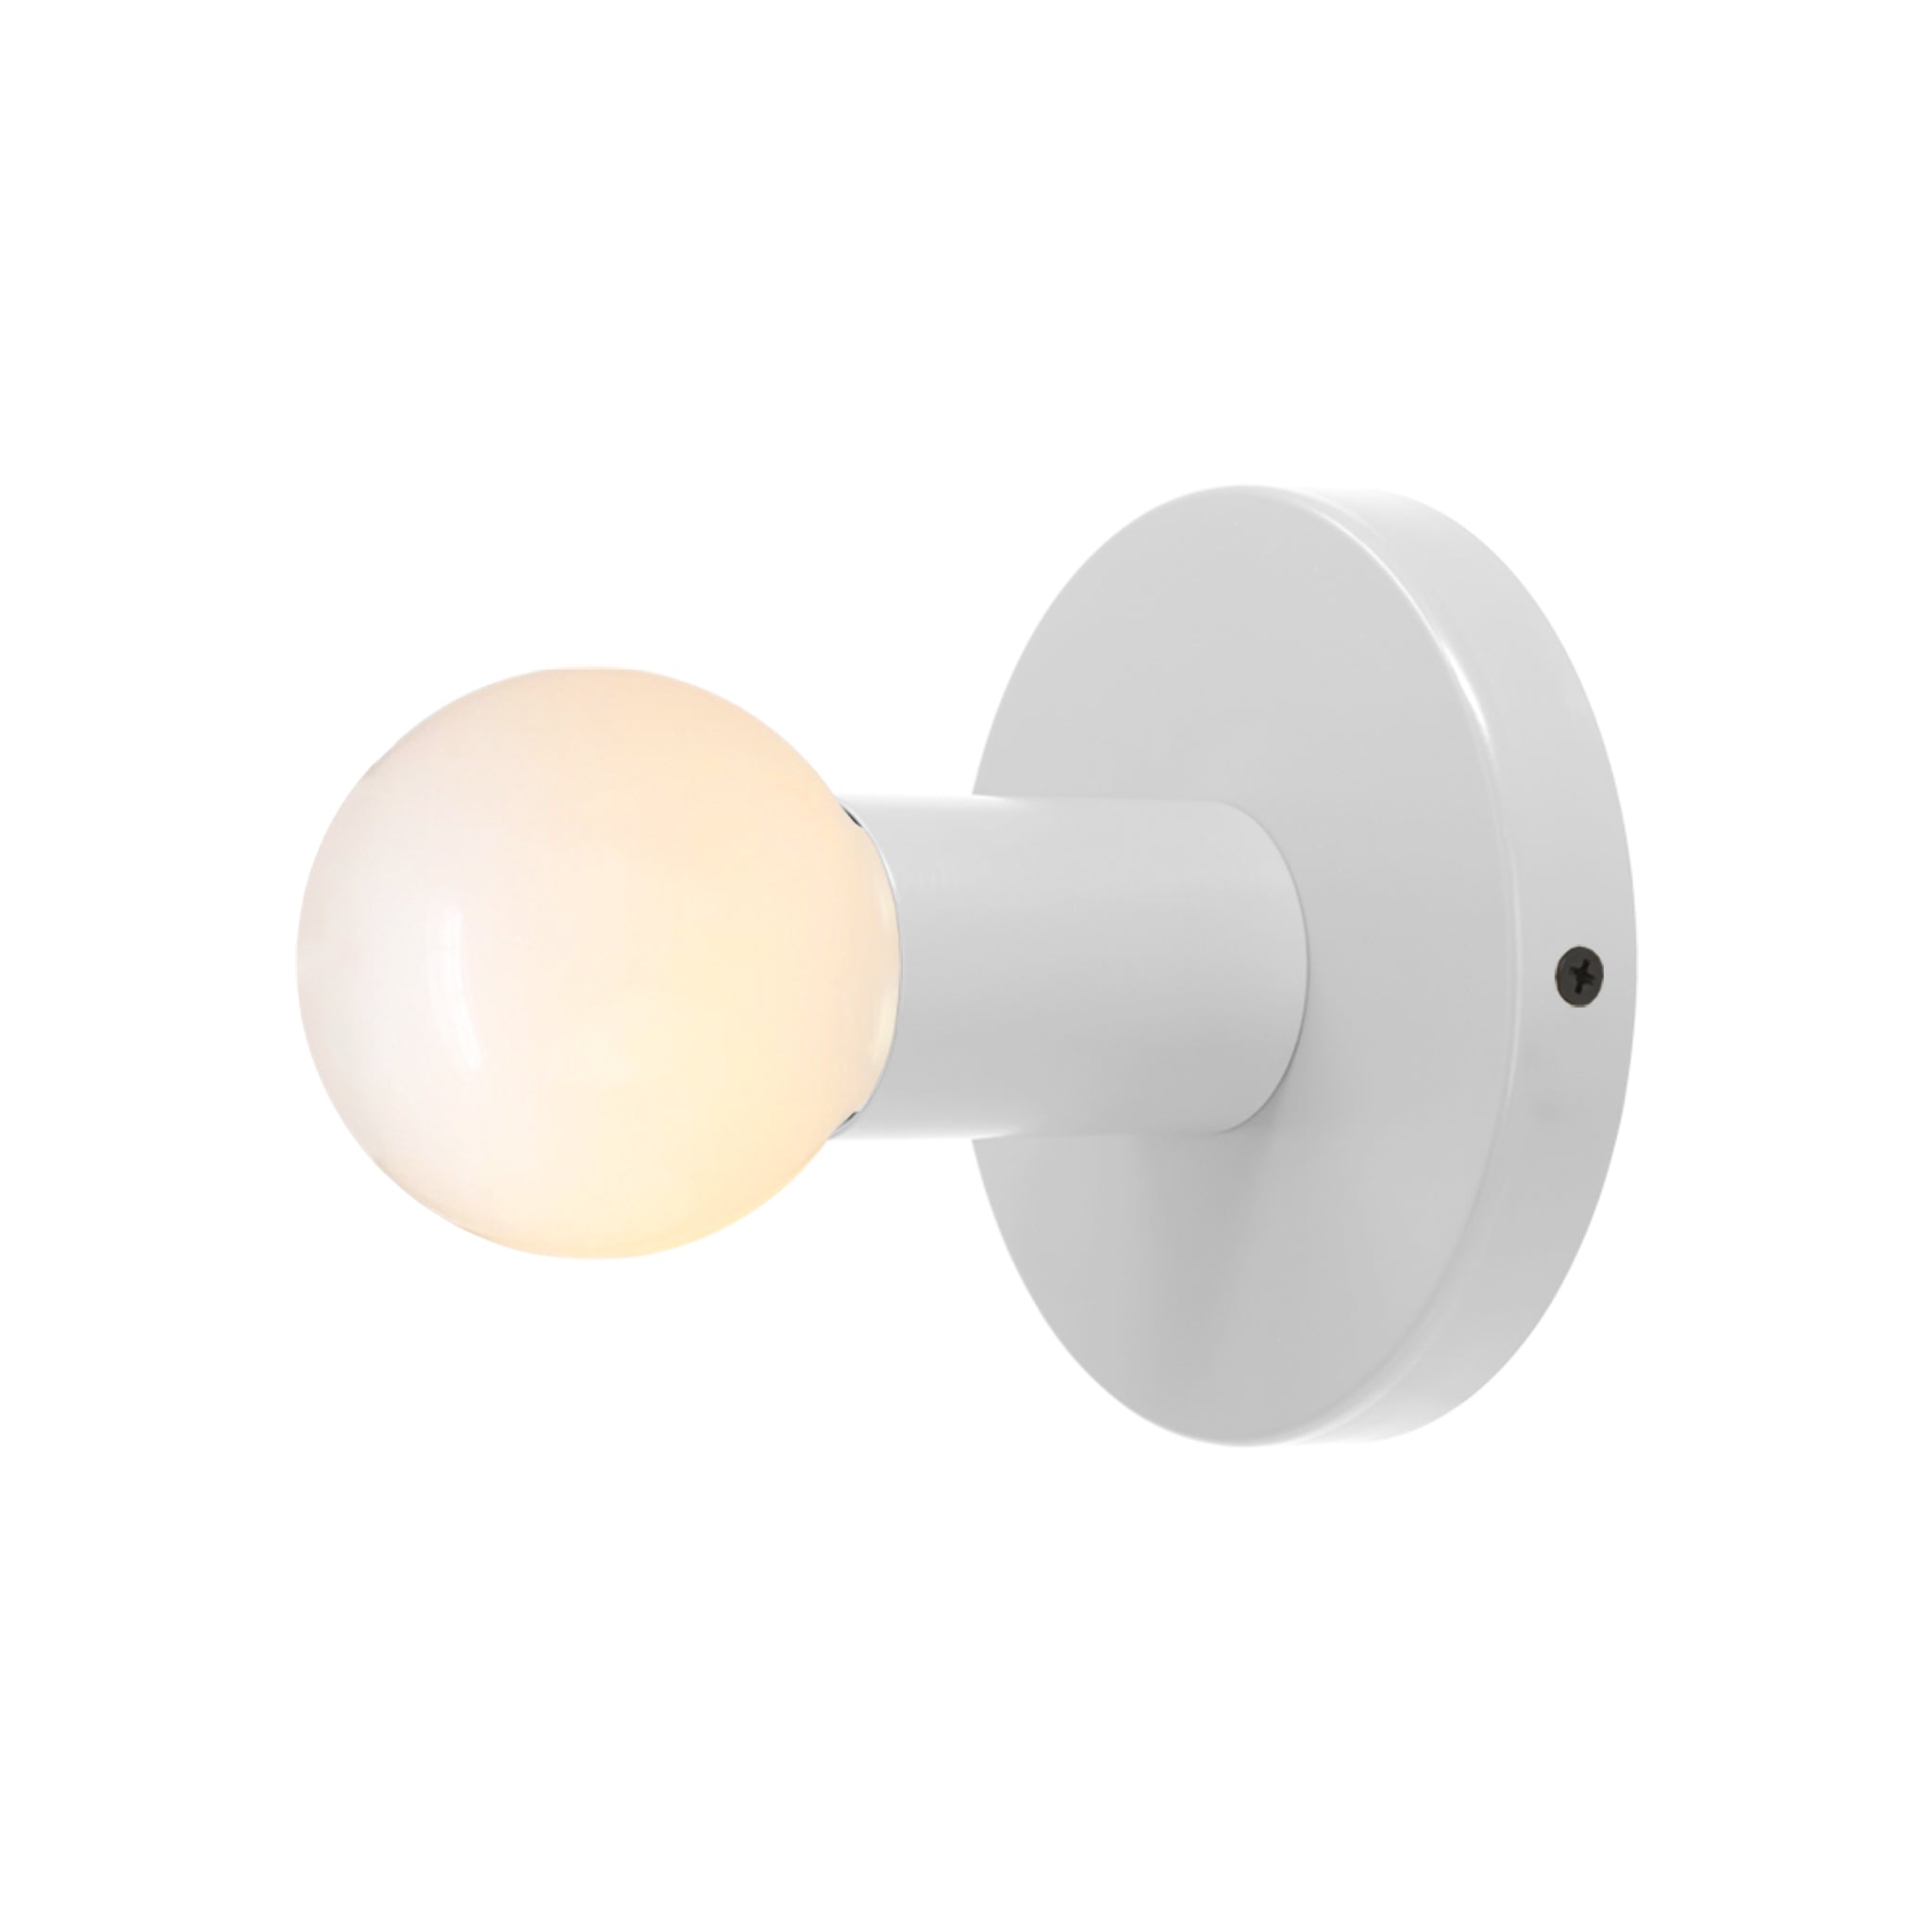 Black and barely color Twink sconce Dutton Brown lighting